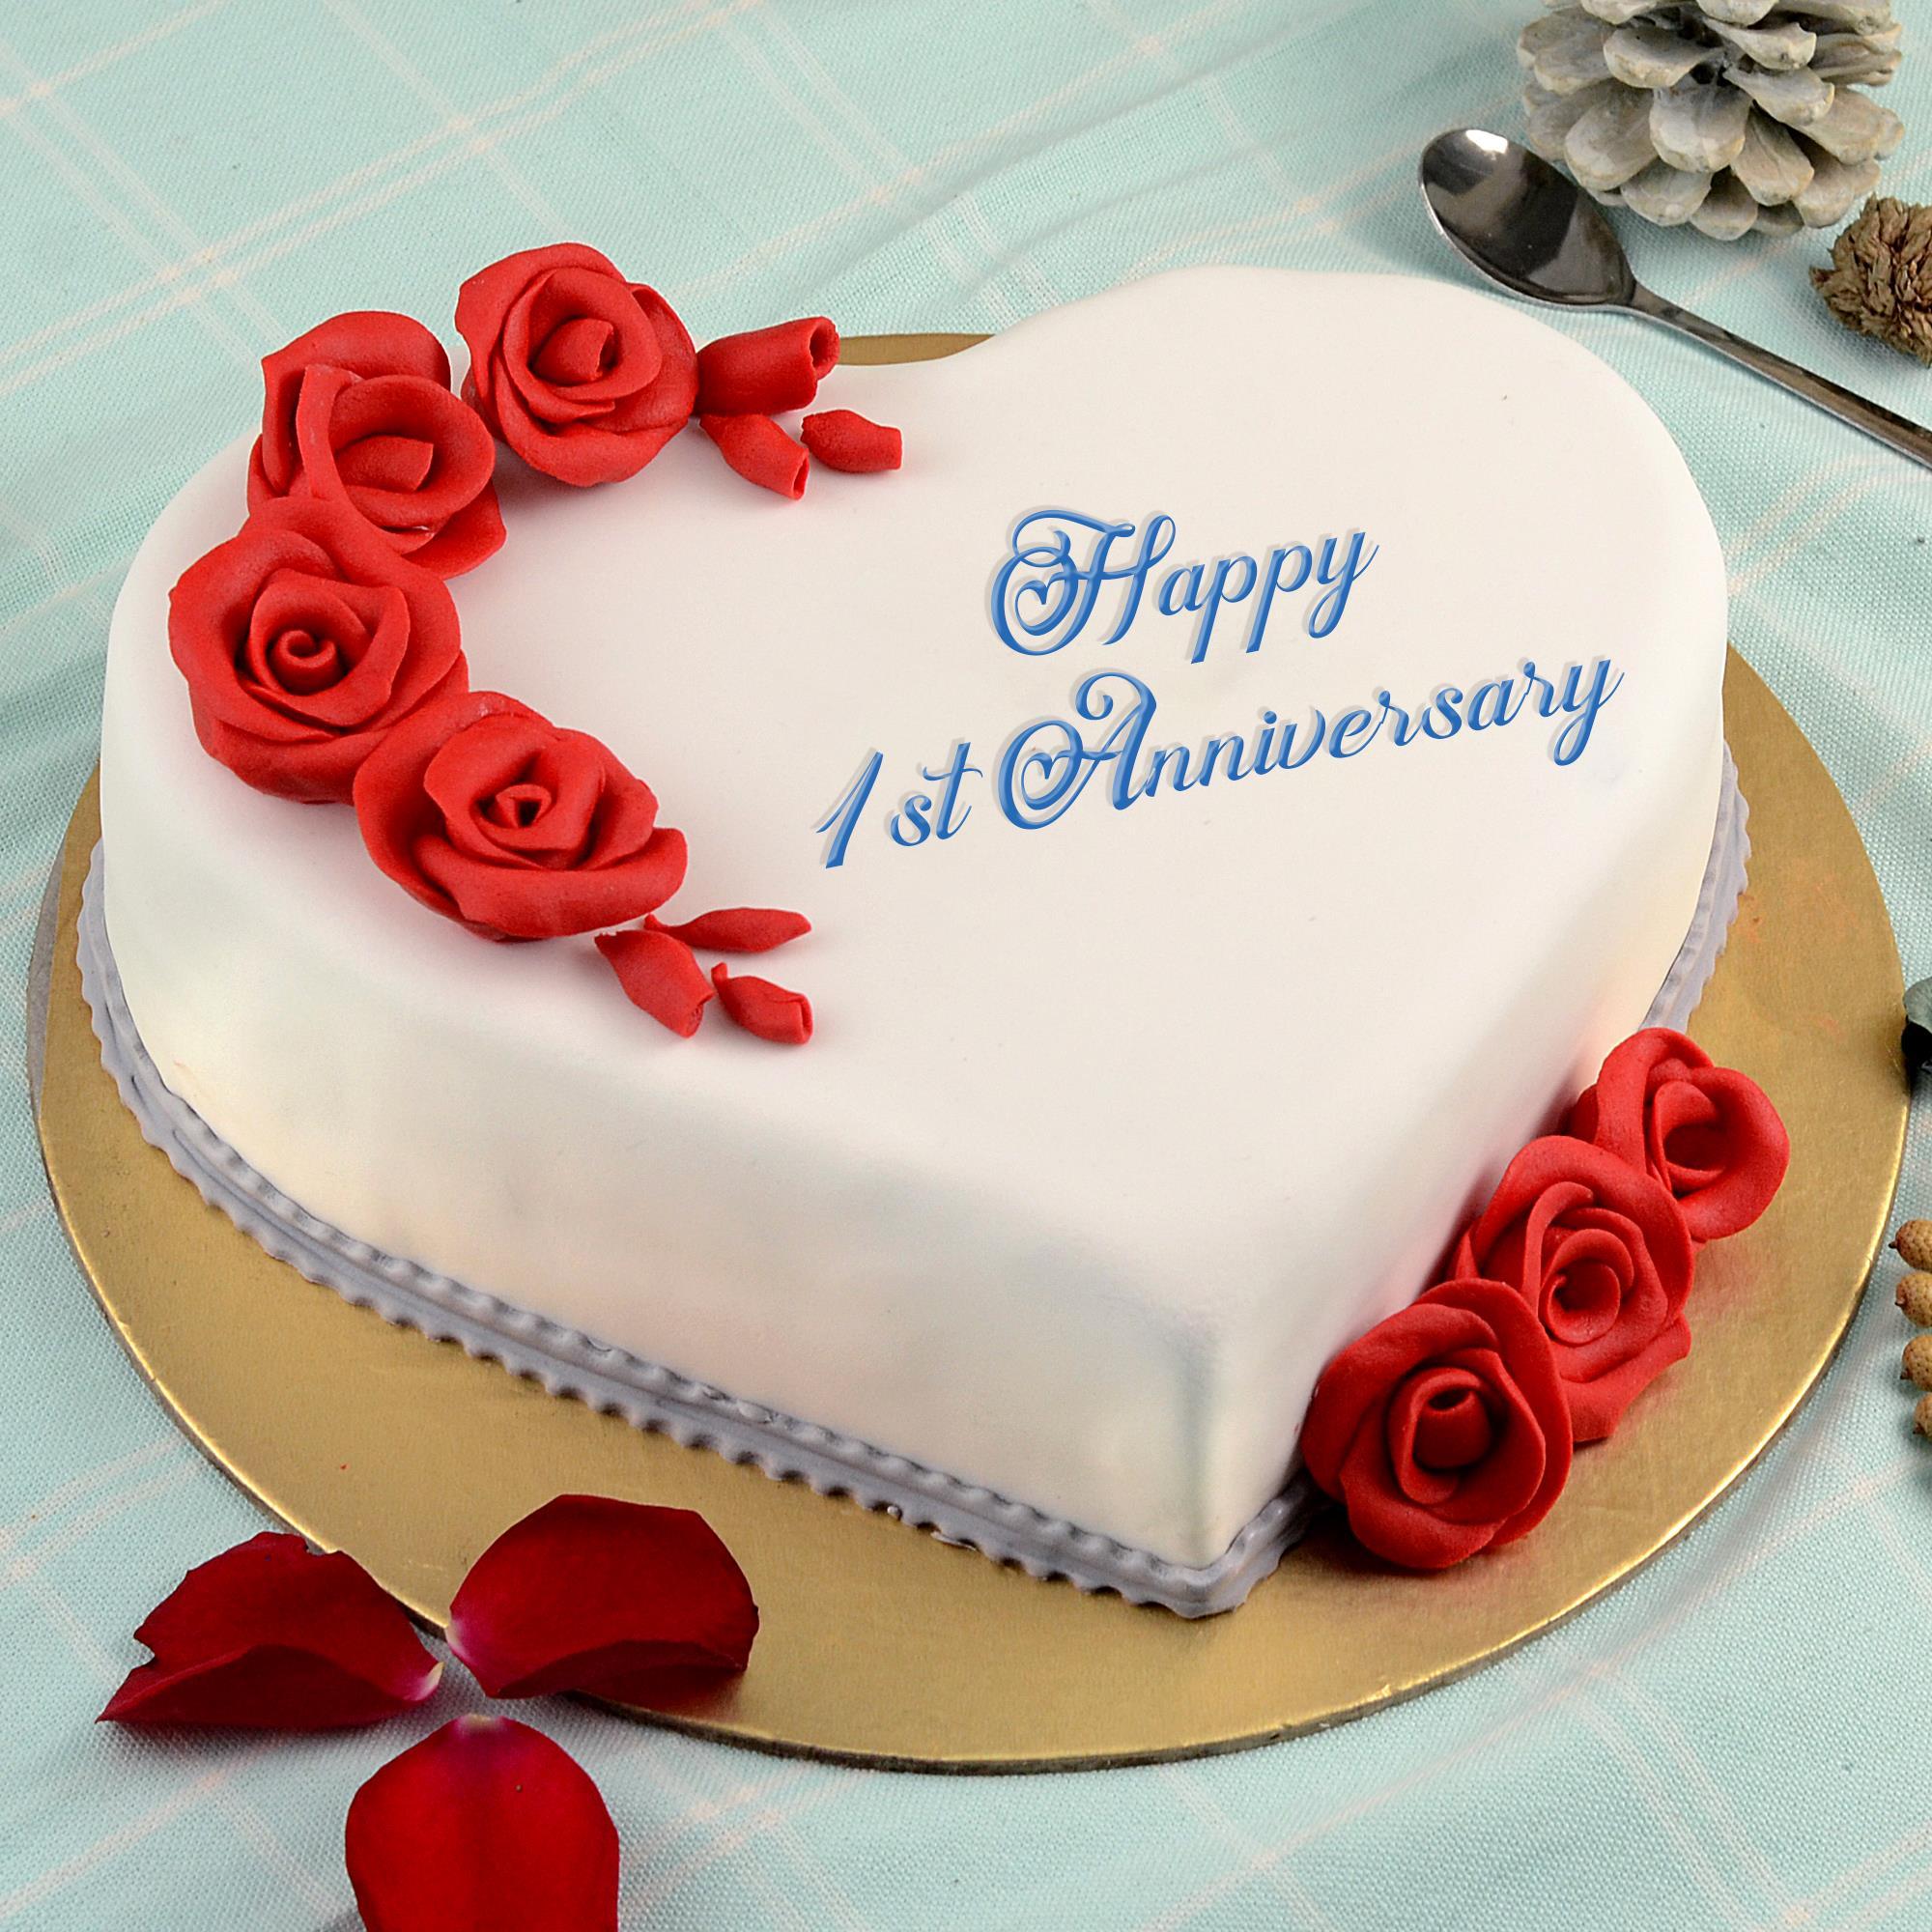 Best Anniversary Special Cake In Ahmedabad | Order Online